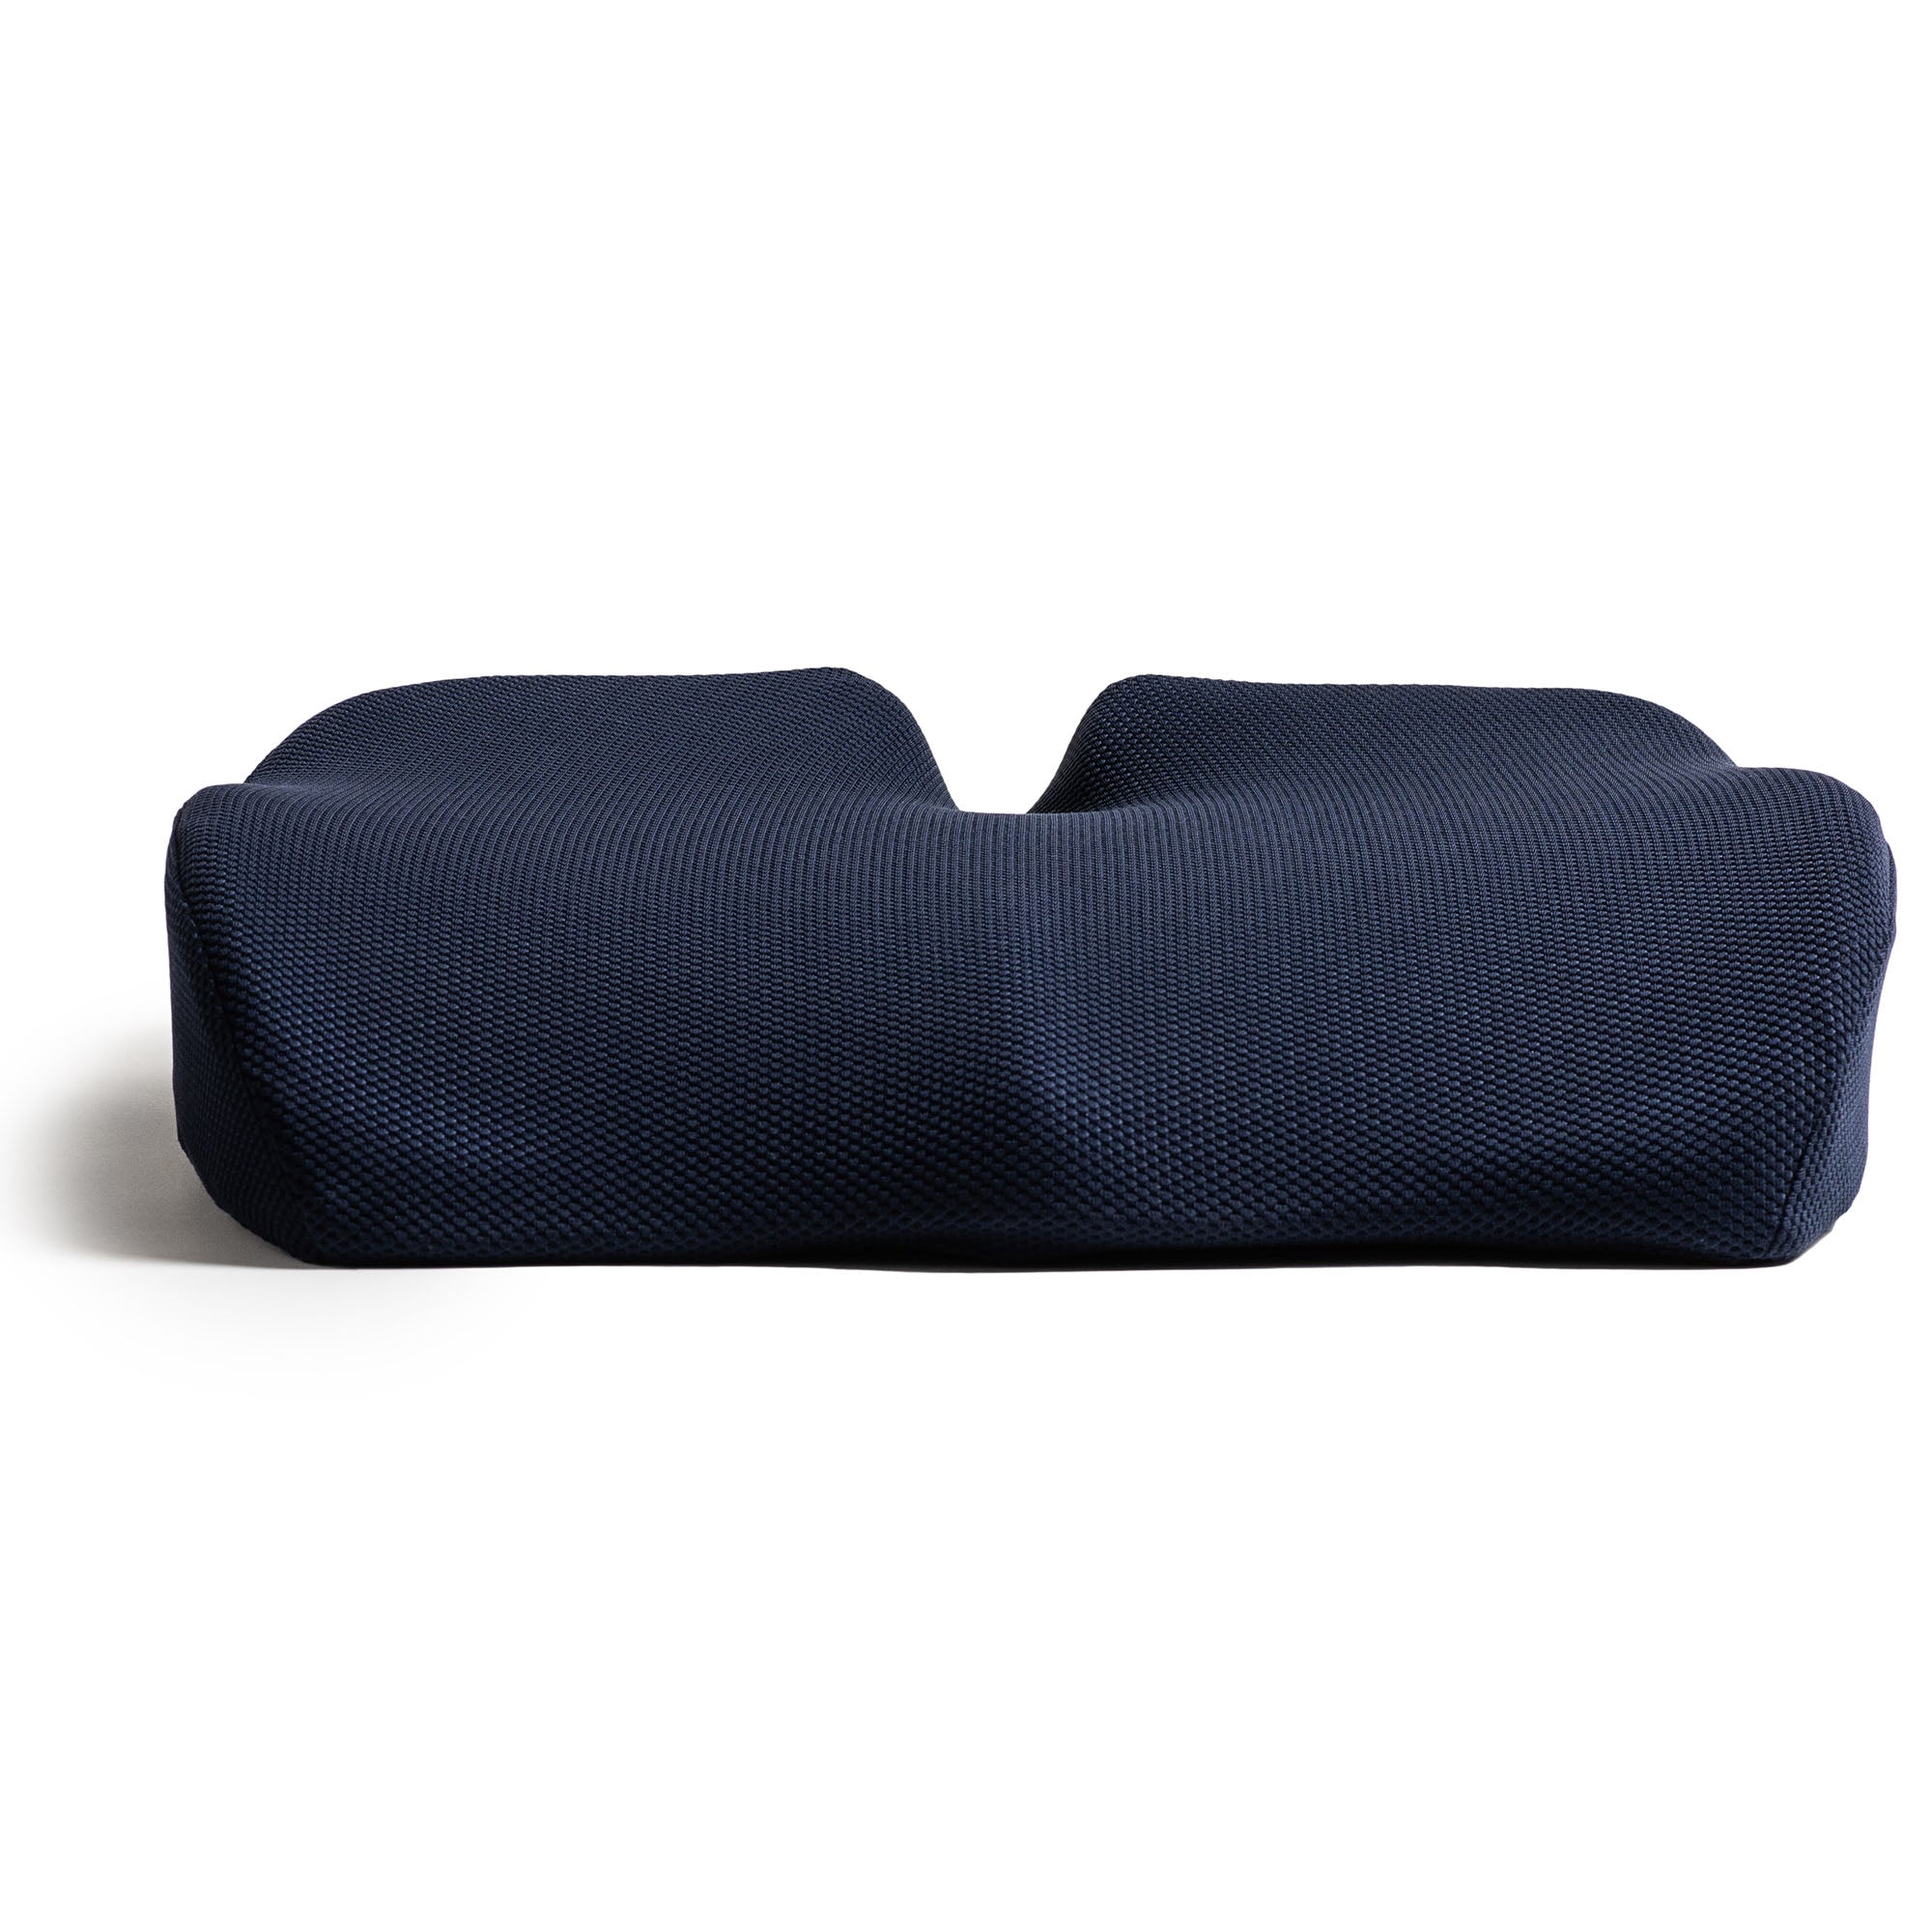 Pressure Relief Seat Cushion by ☁OrthoCloud